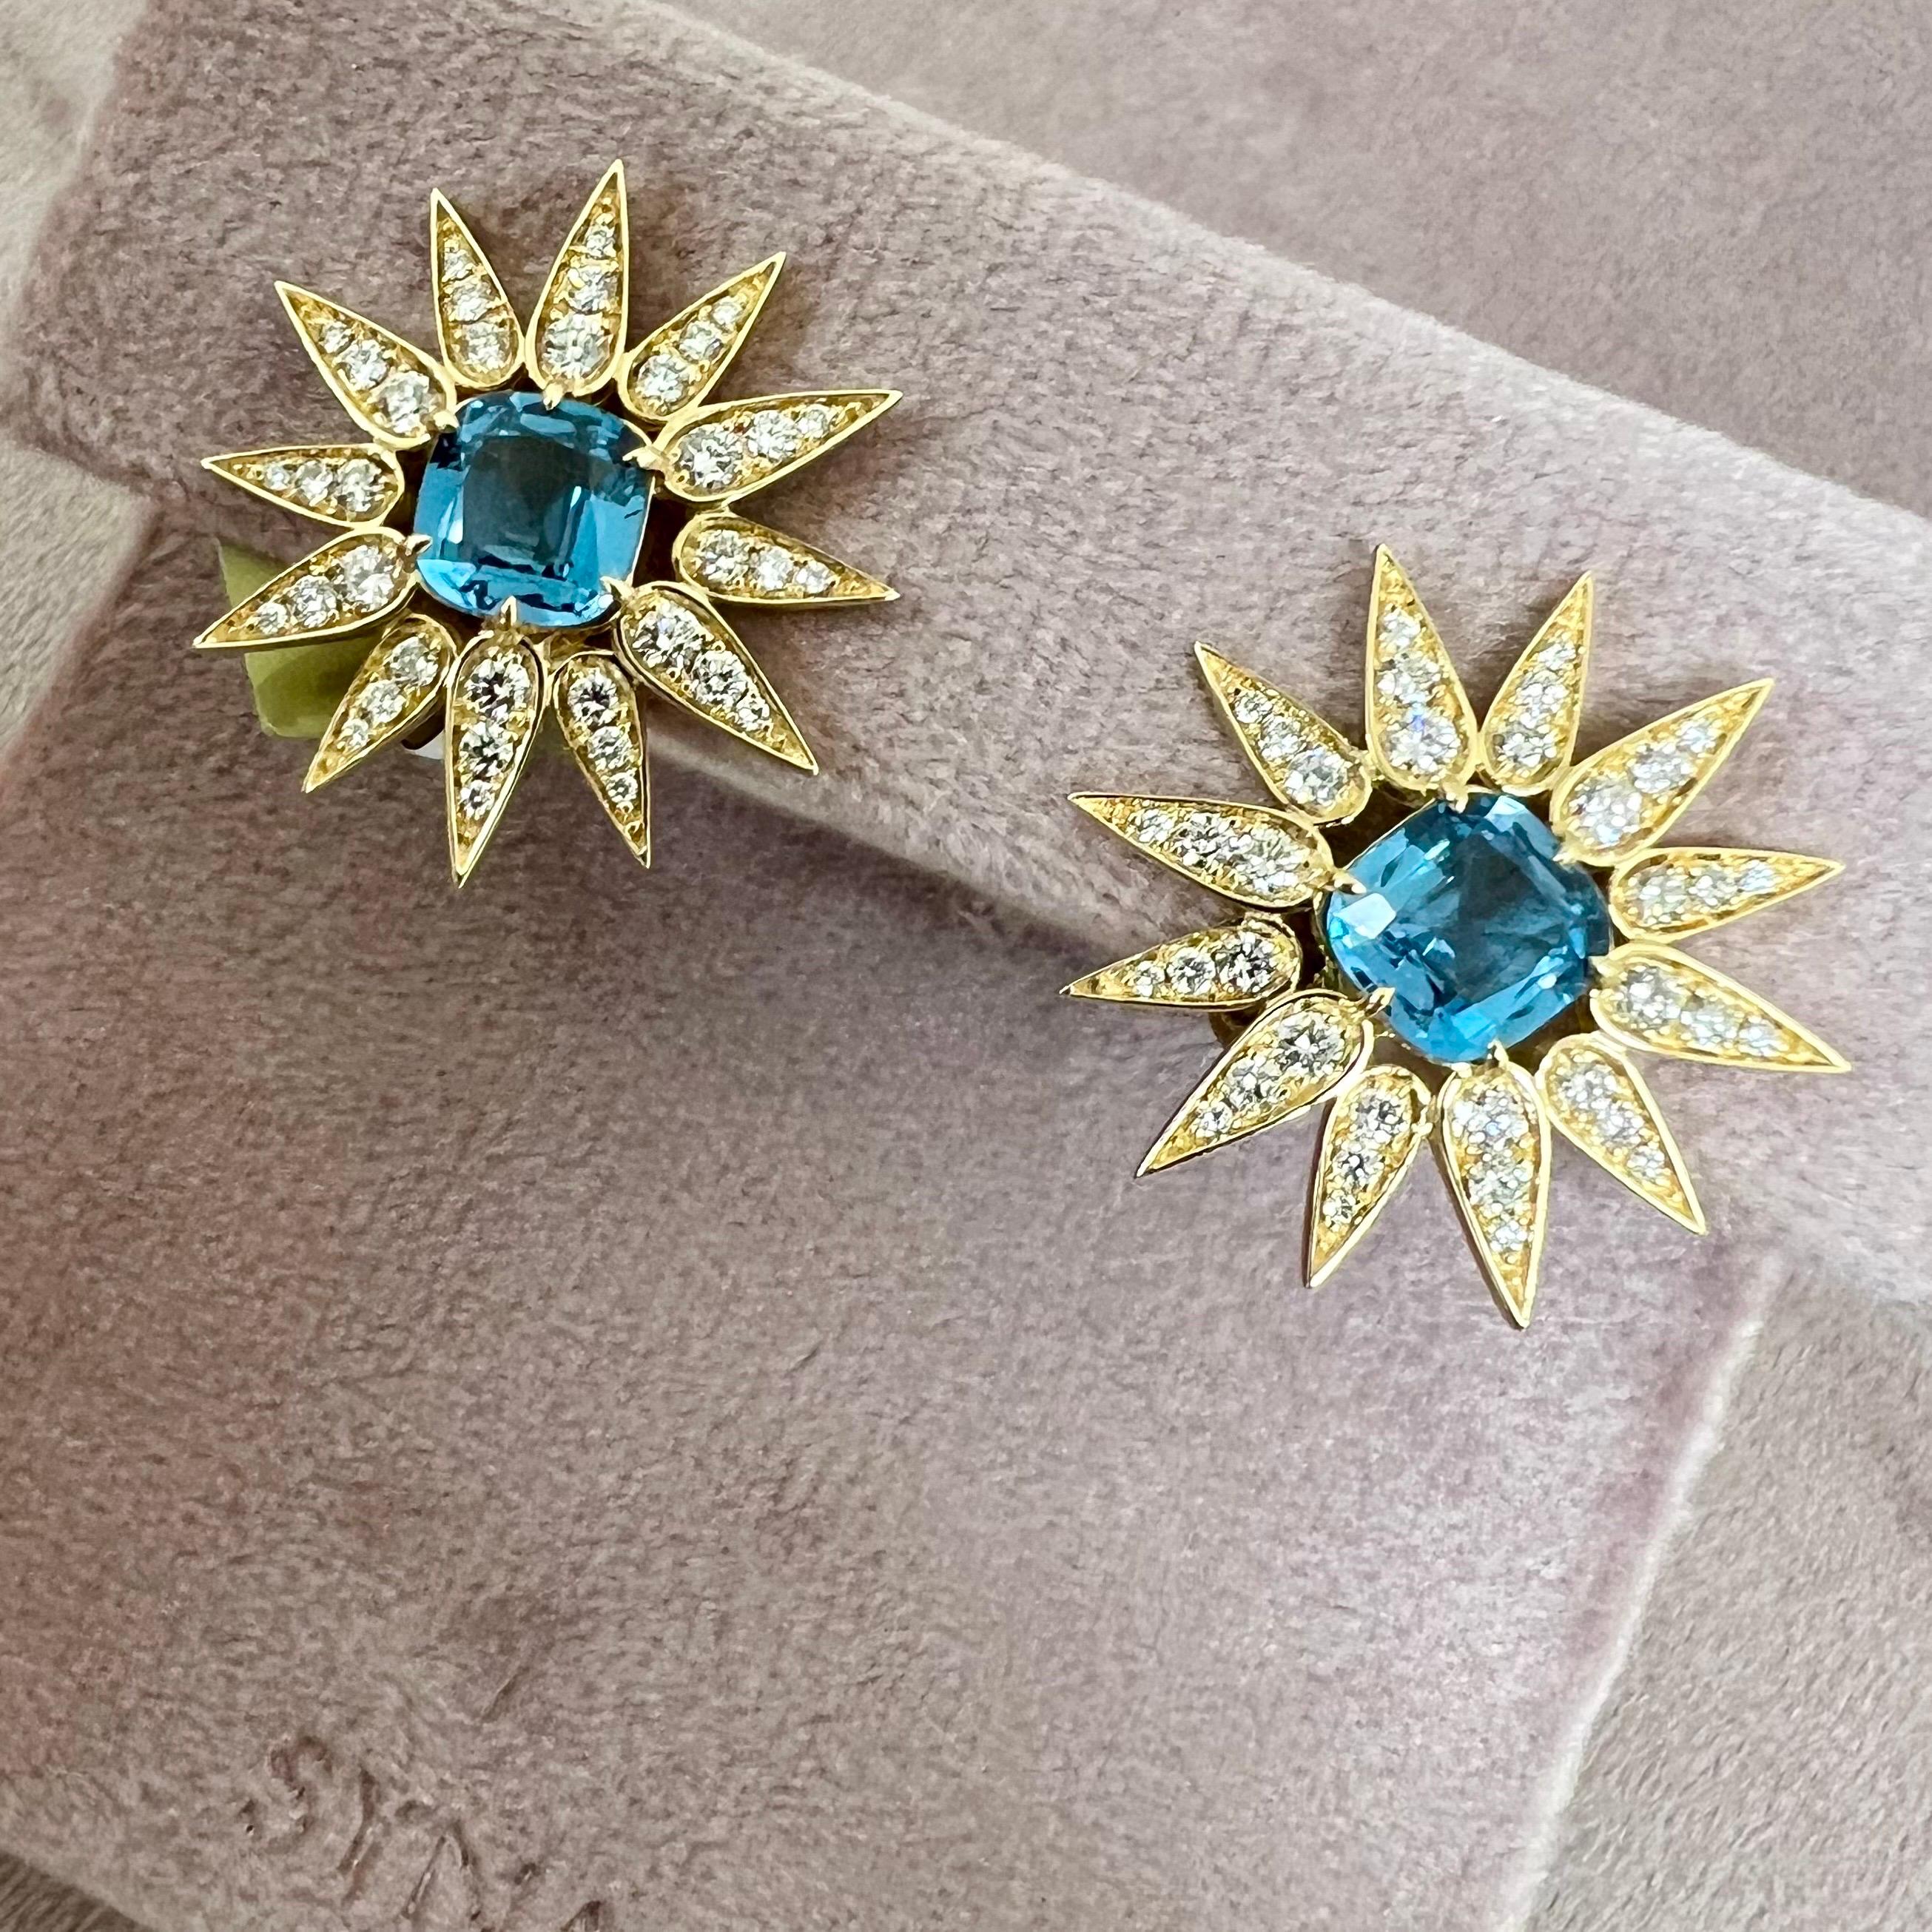 Contemporary Syna Yellow Gold Sunburst Earrings with Blue Topaz and Diamonds For Sale